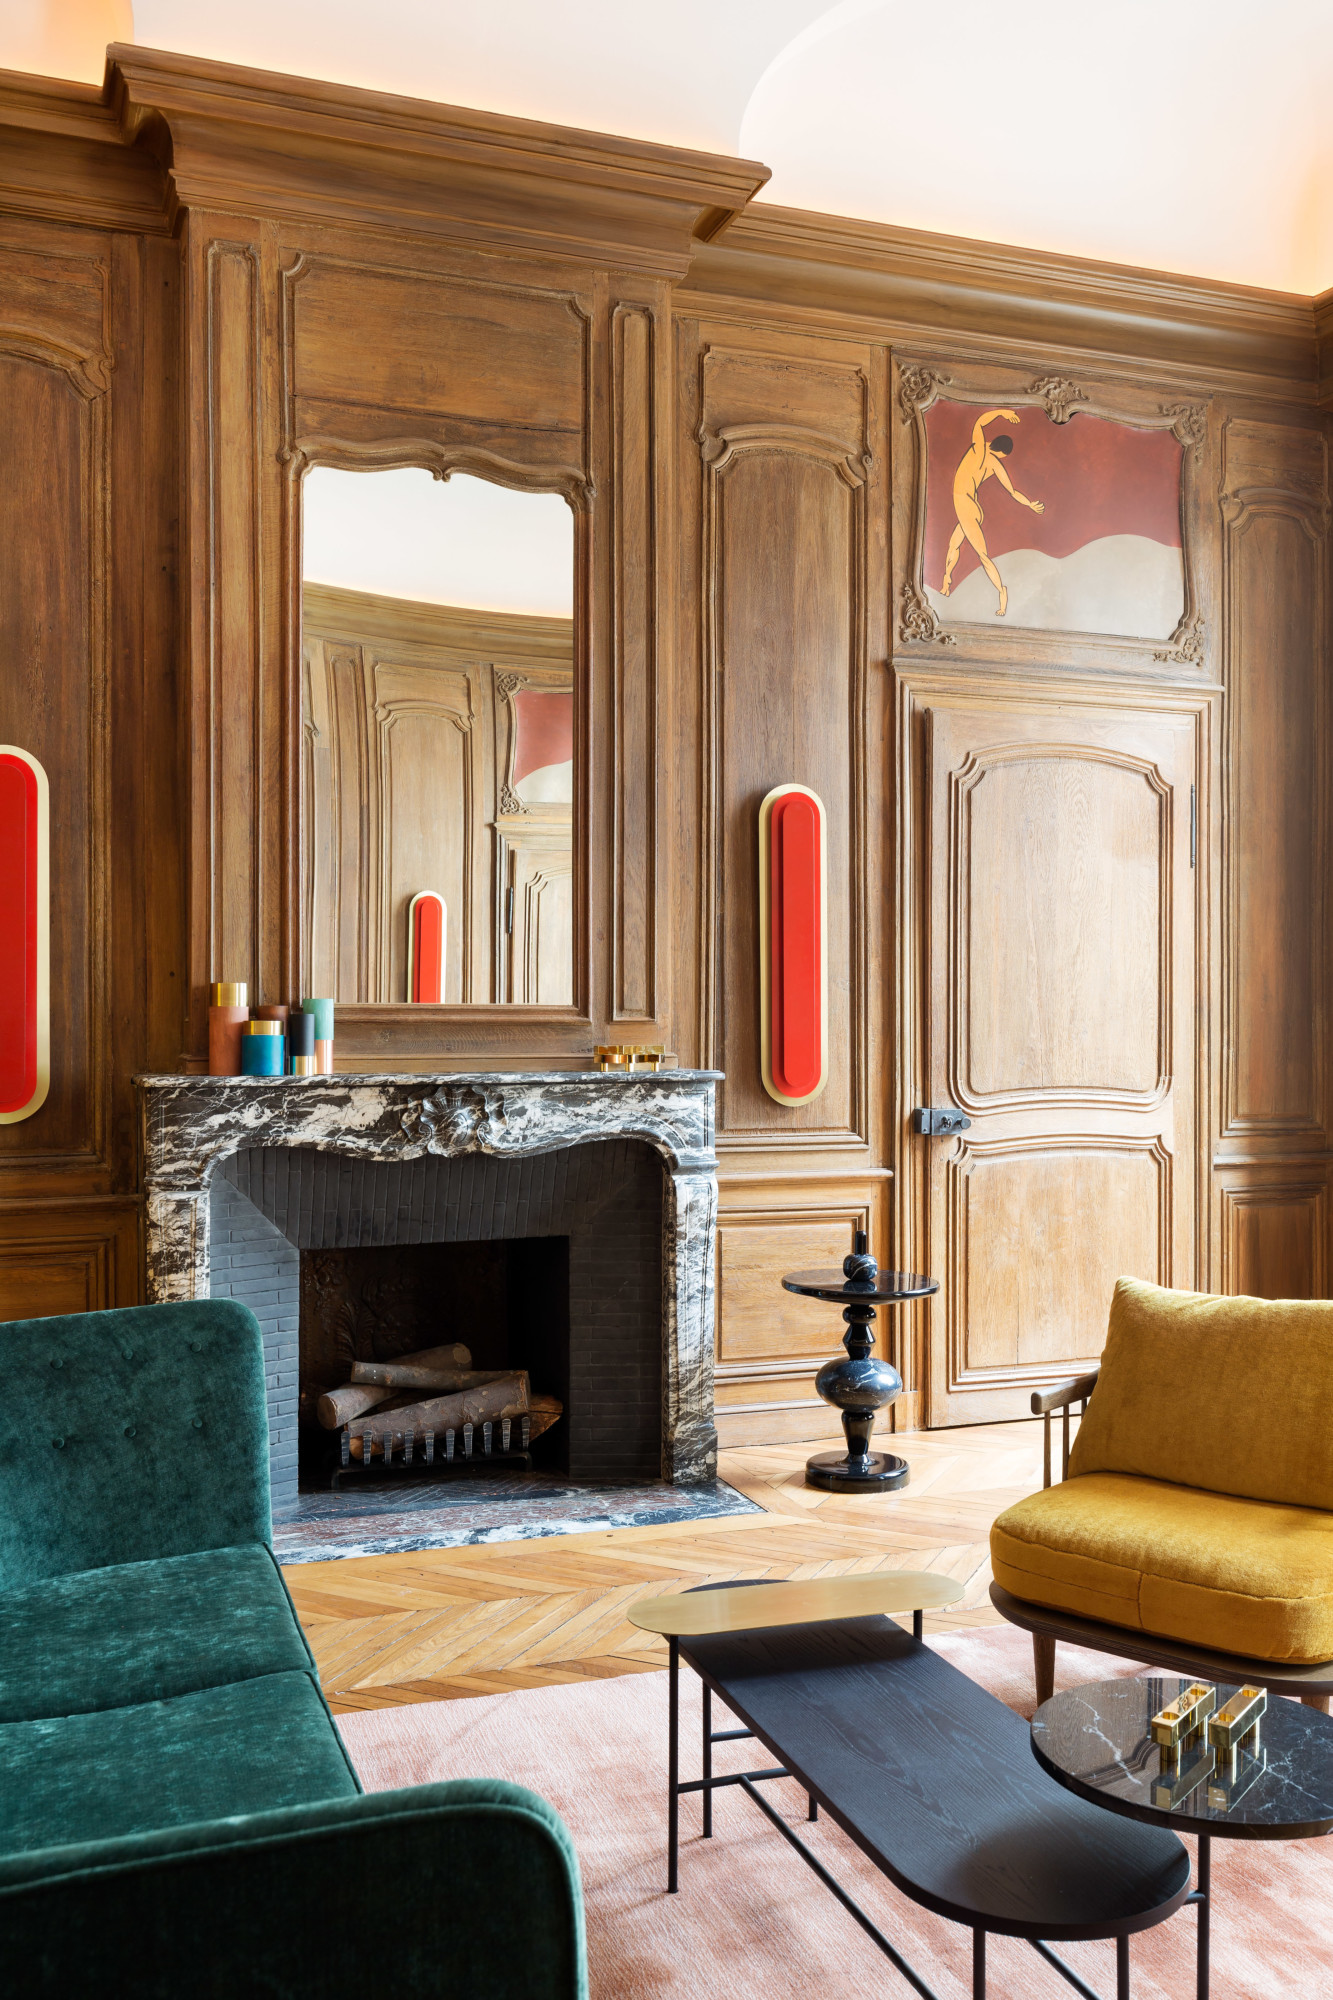 Chanel replicates Coco Chanel's apartment at the Grand Palais